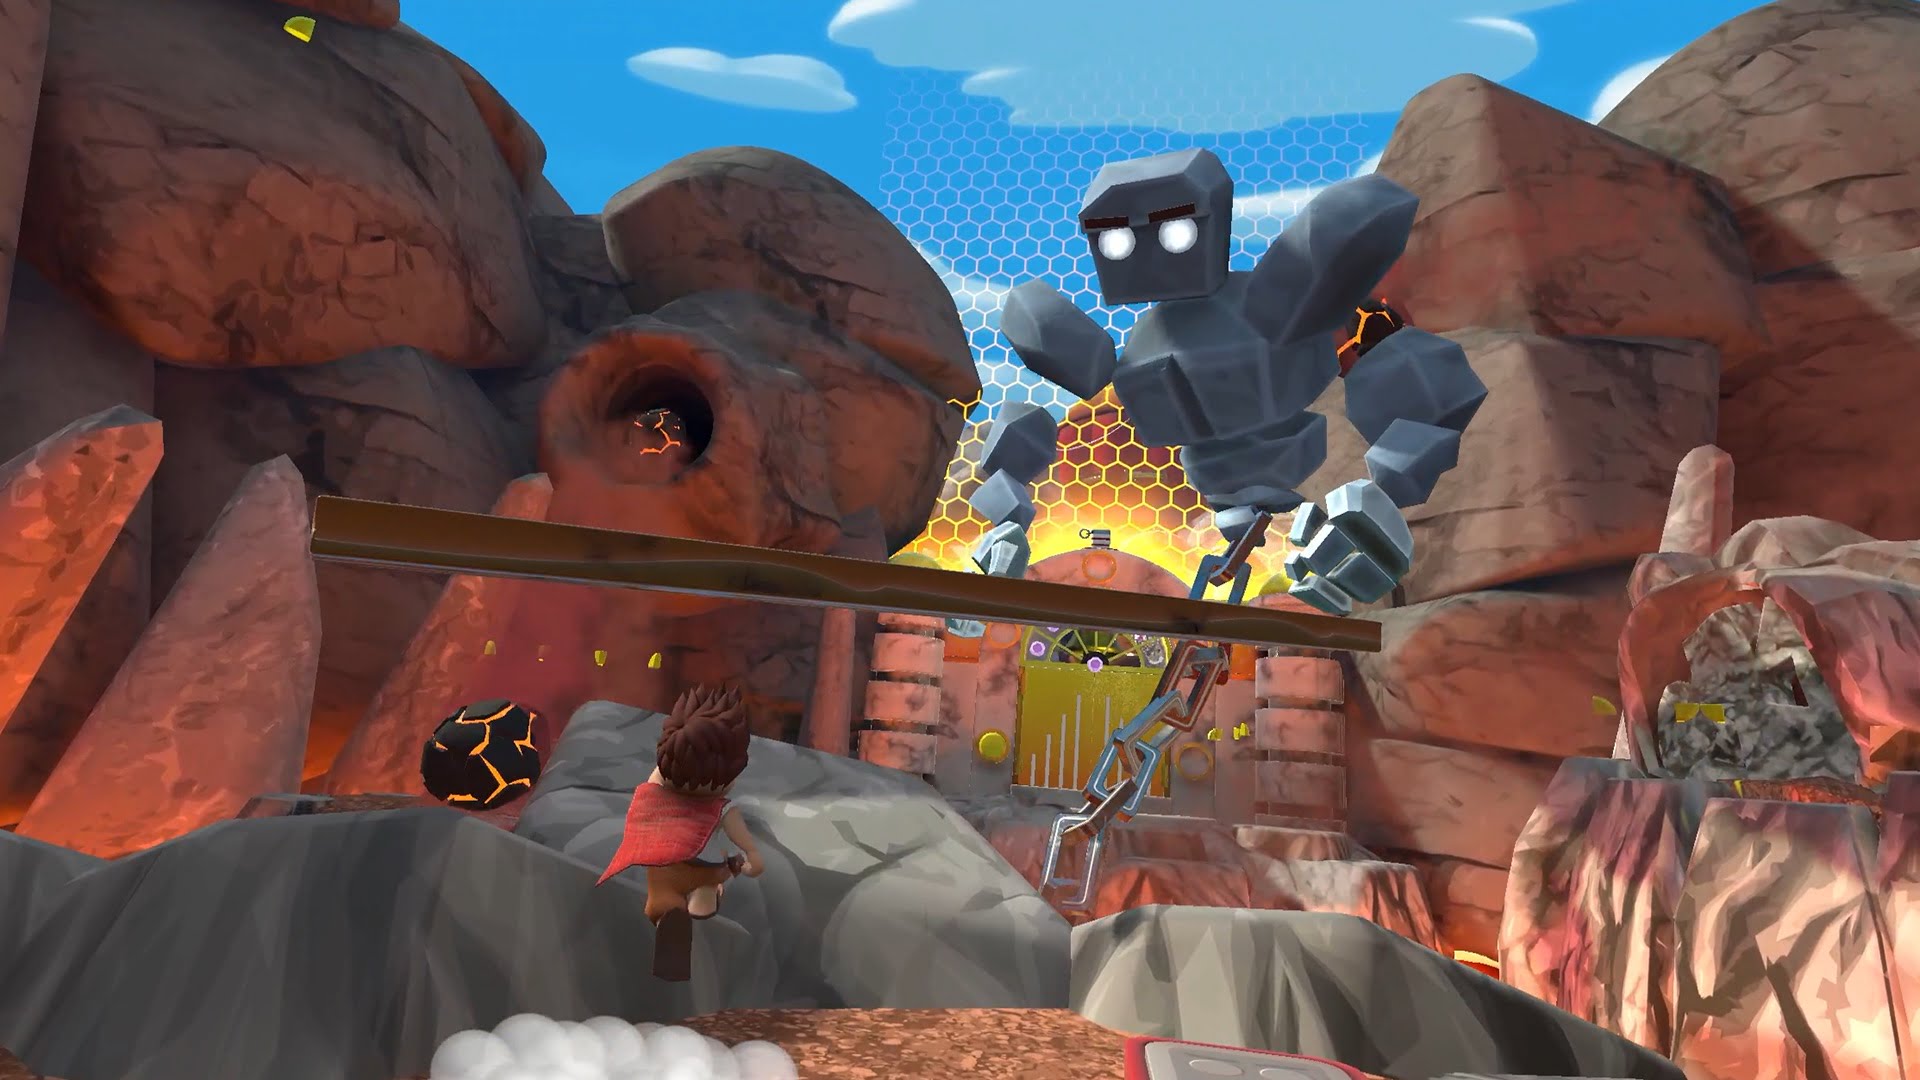 Asymmetric platformer 'VR Giants' is coming soon to Steam